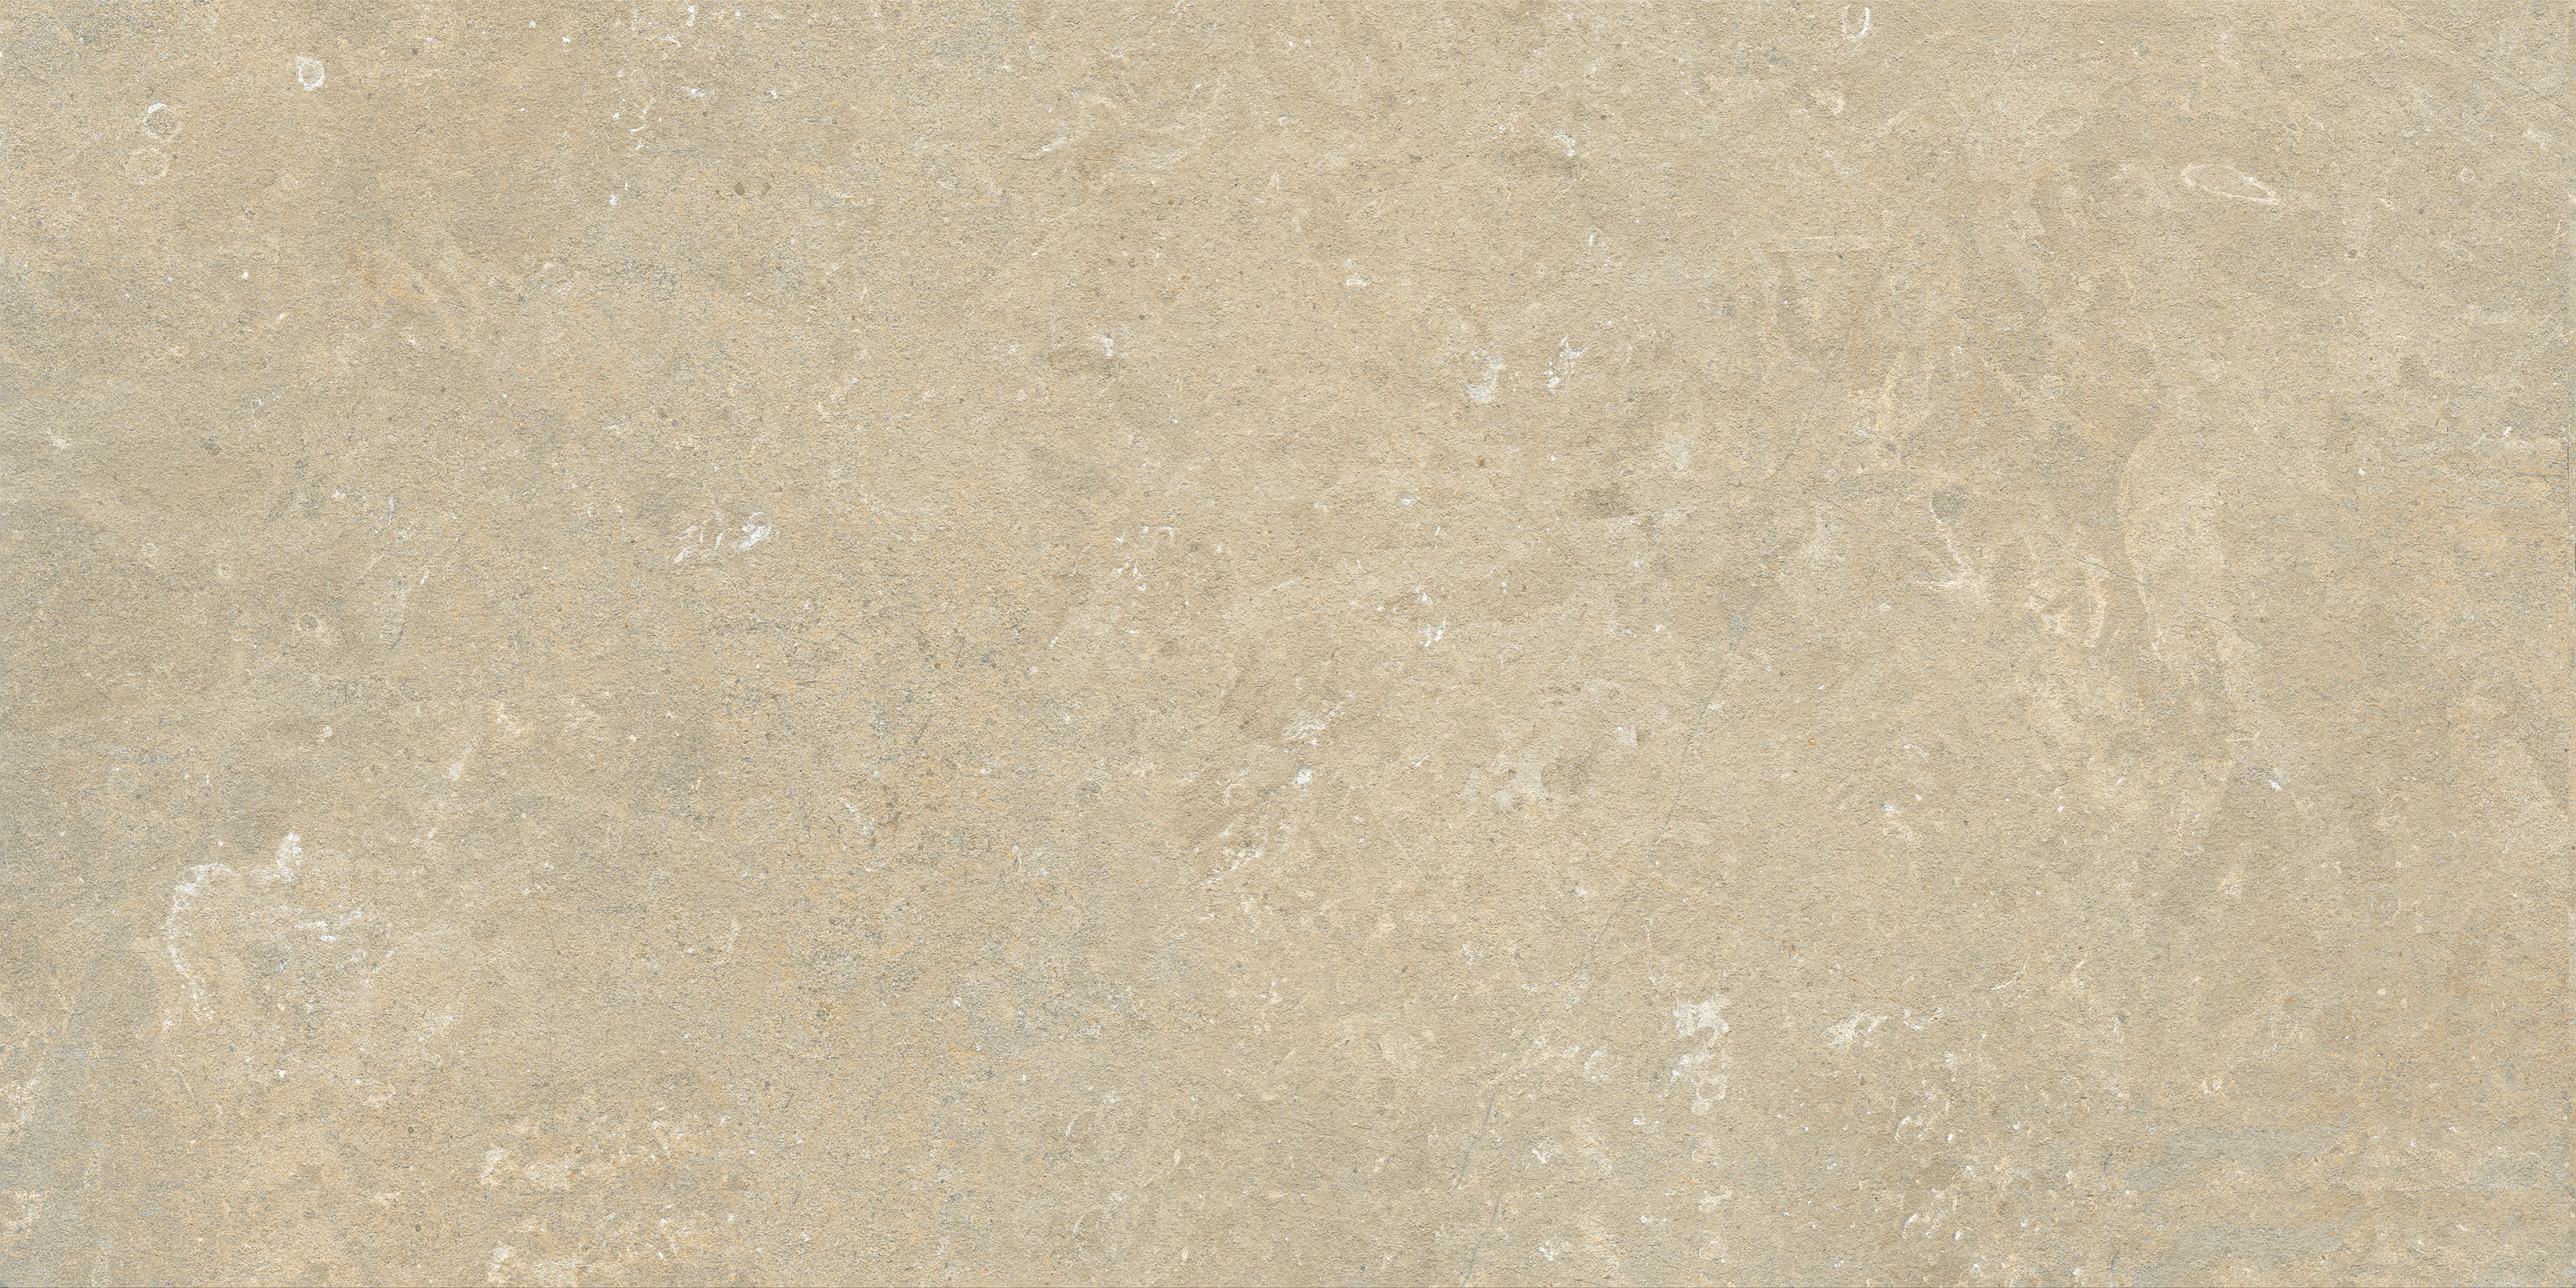 Marca Corona Arkistyle Sand Strutturato Hithick J207 strutturato hithick 60x120cm rectified 20mm